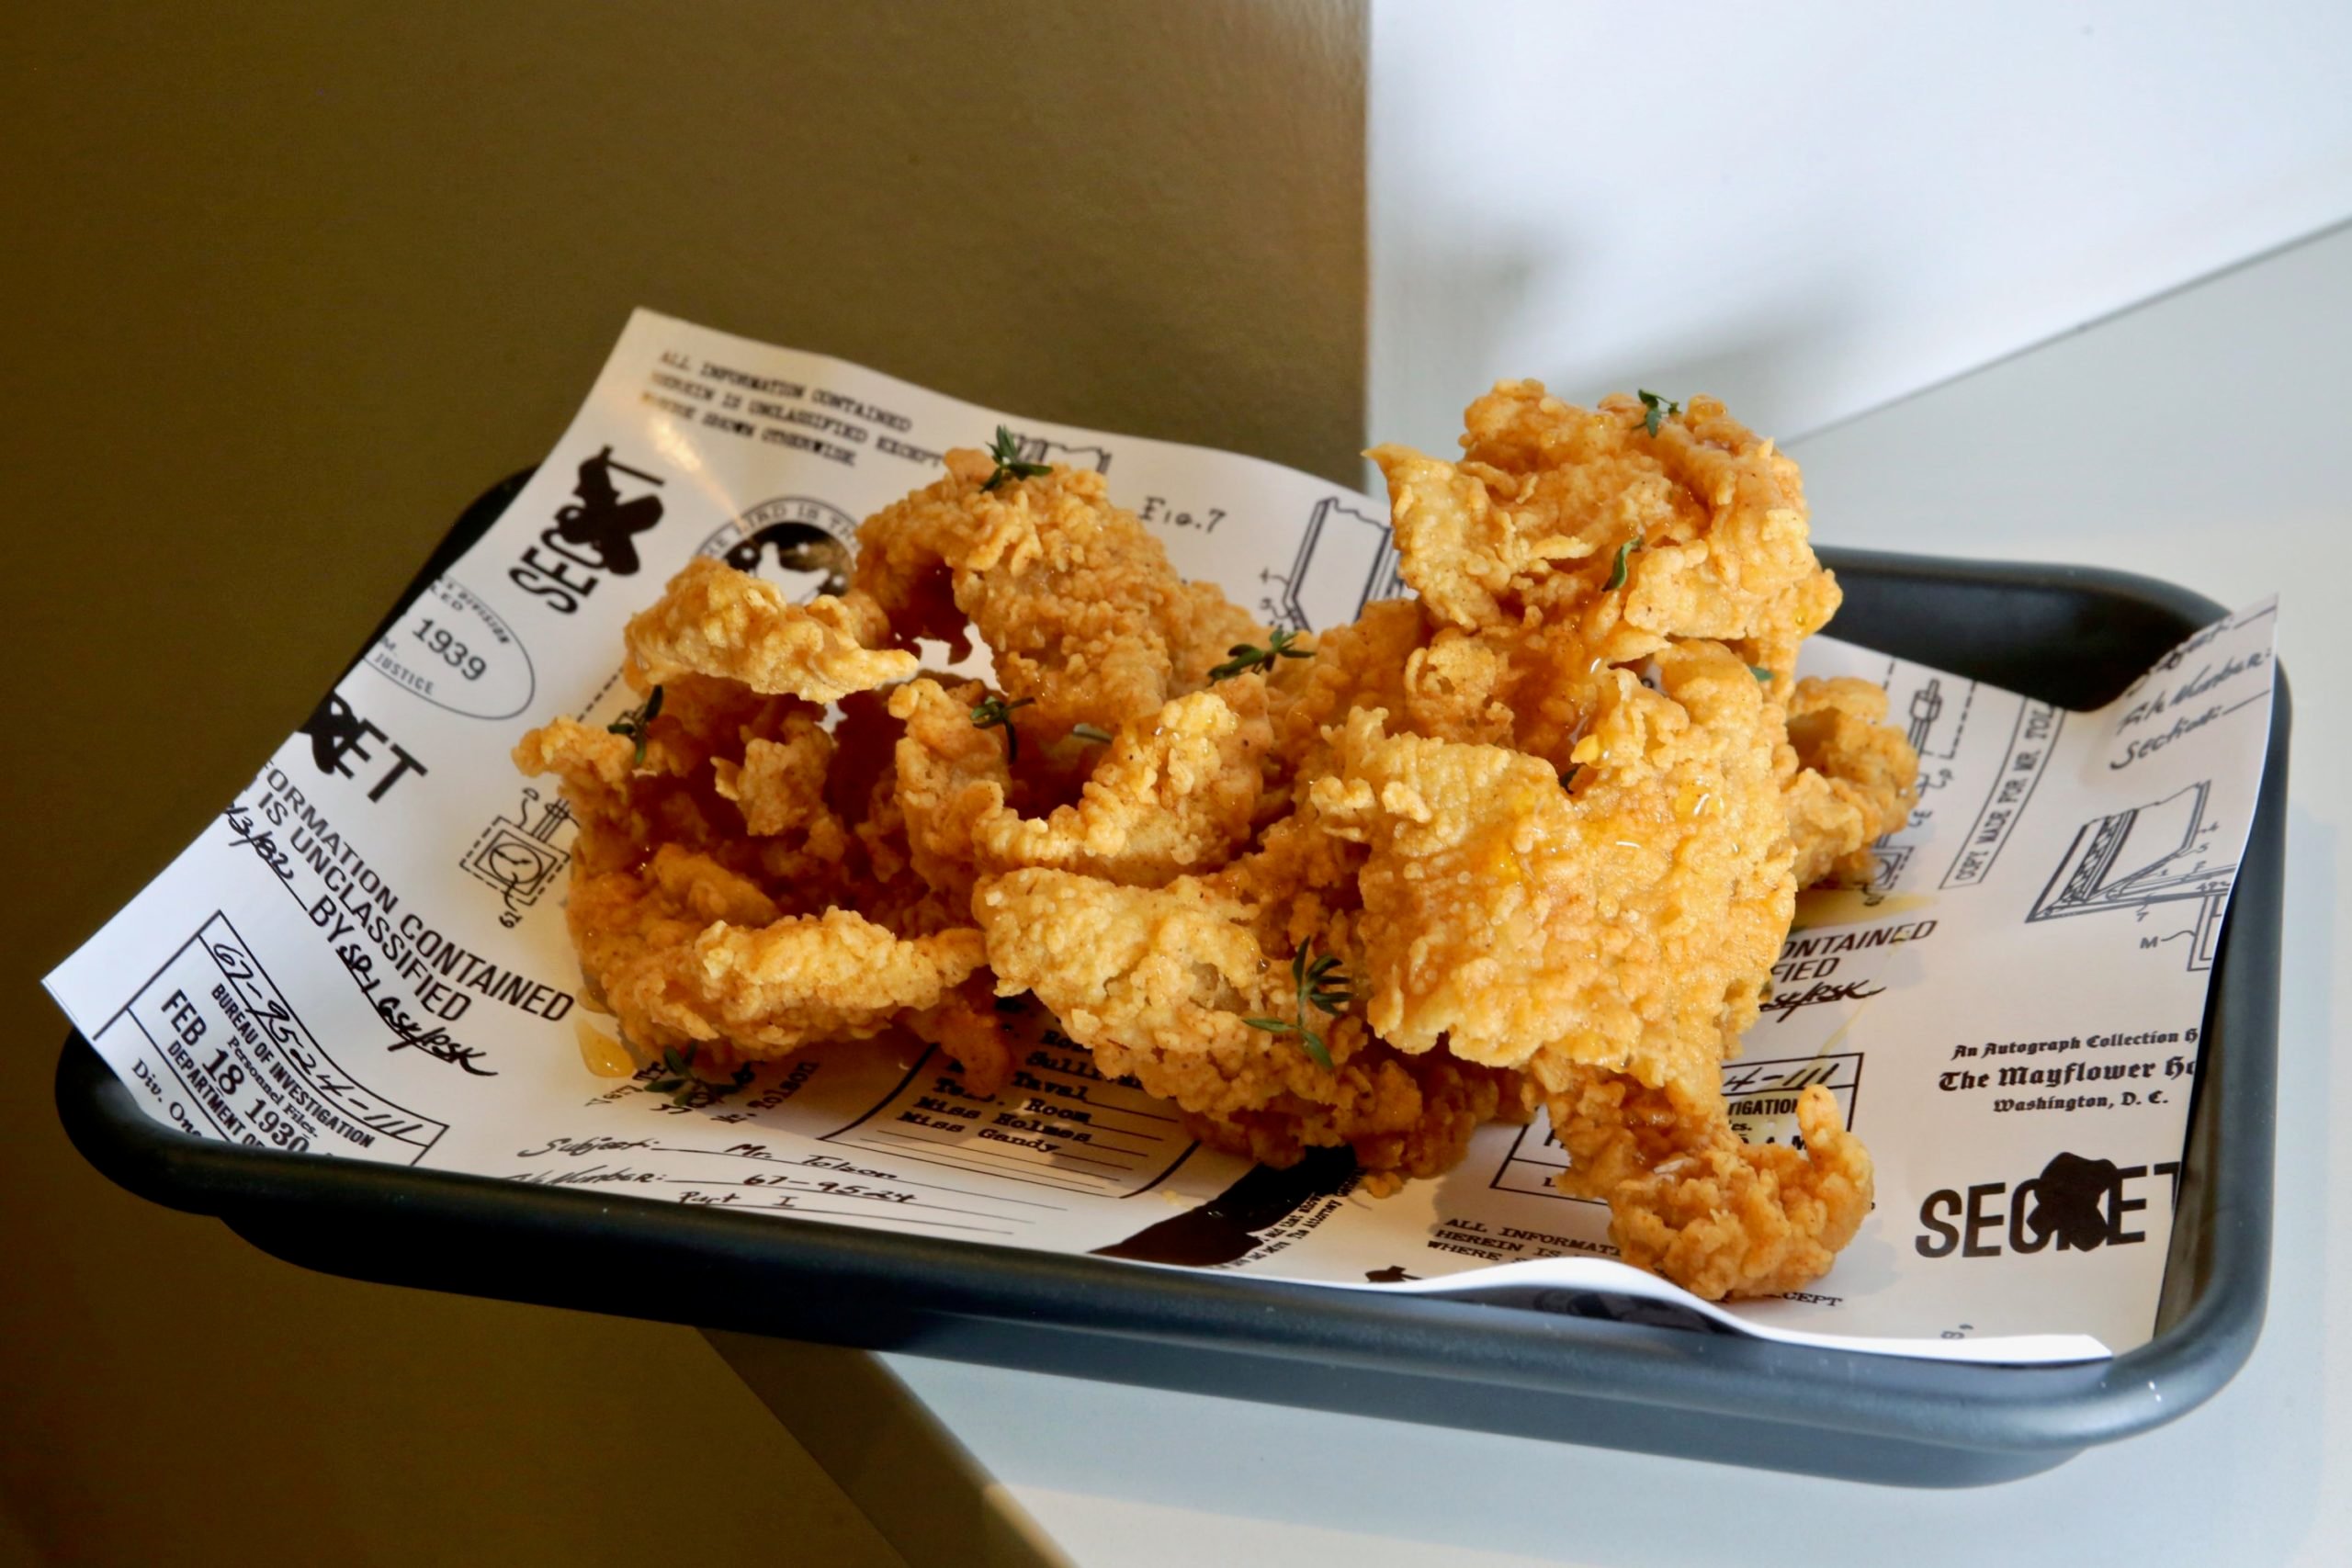 Crispy chicken skins with hot honey. Photograph by Evy Mages.